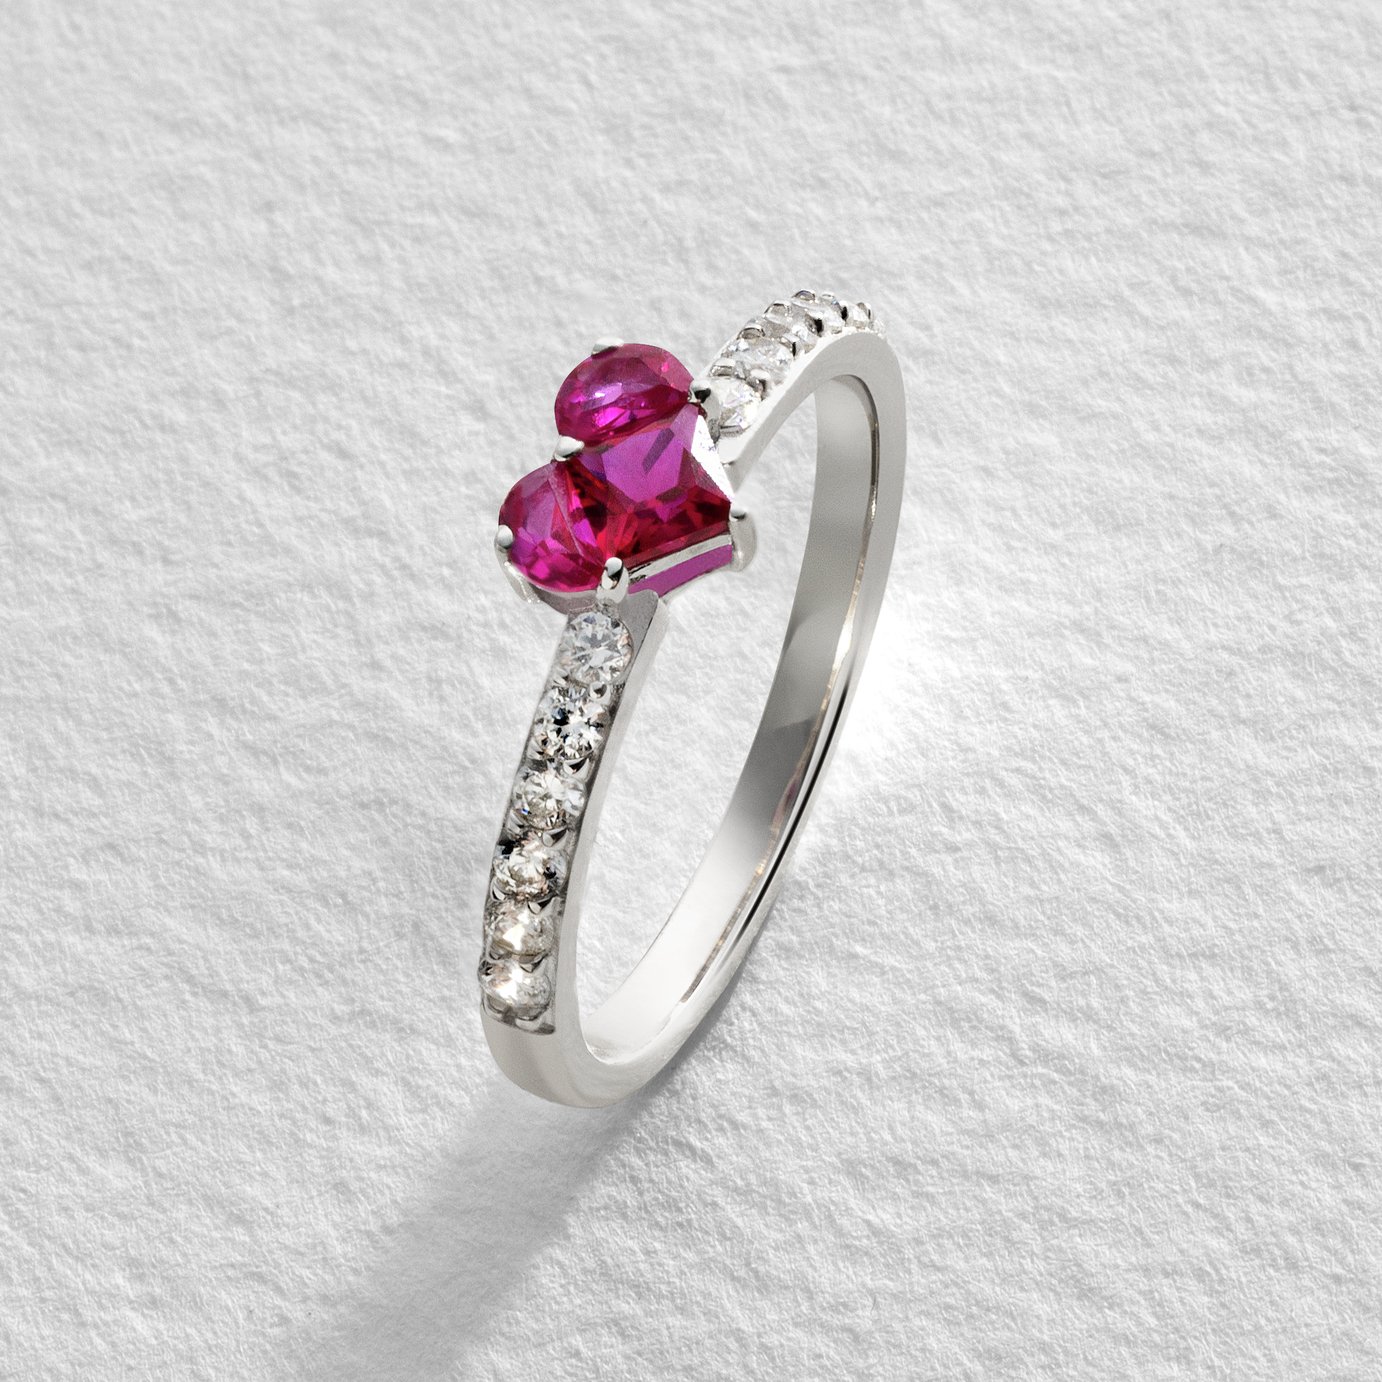 Revere Sterling Silver Cubic Zirconia Ruby Heart Ring - S